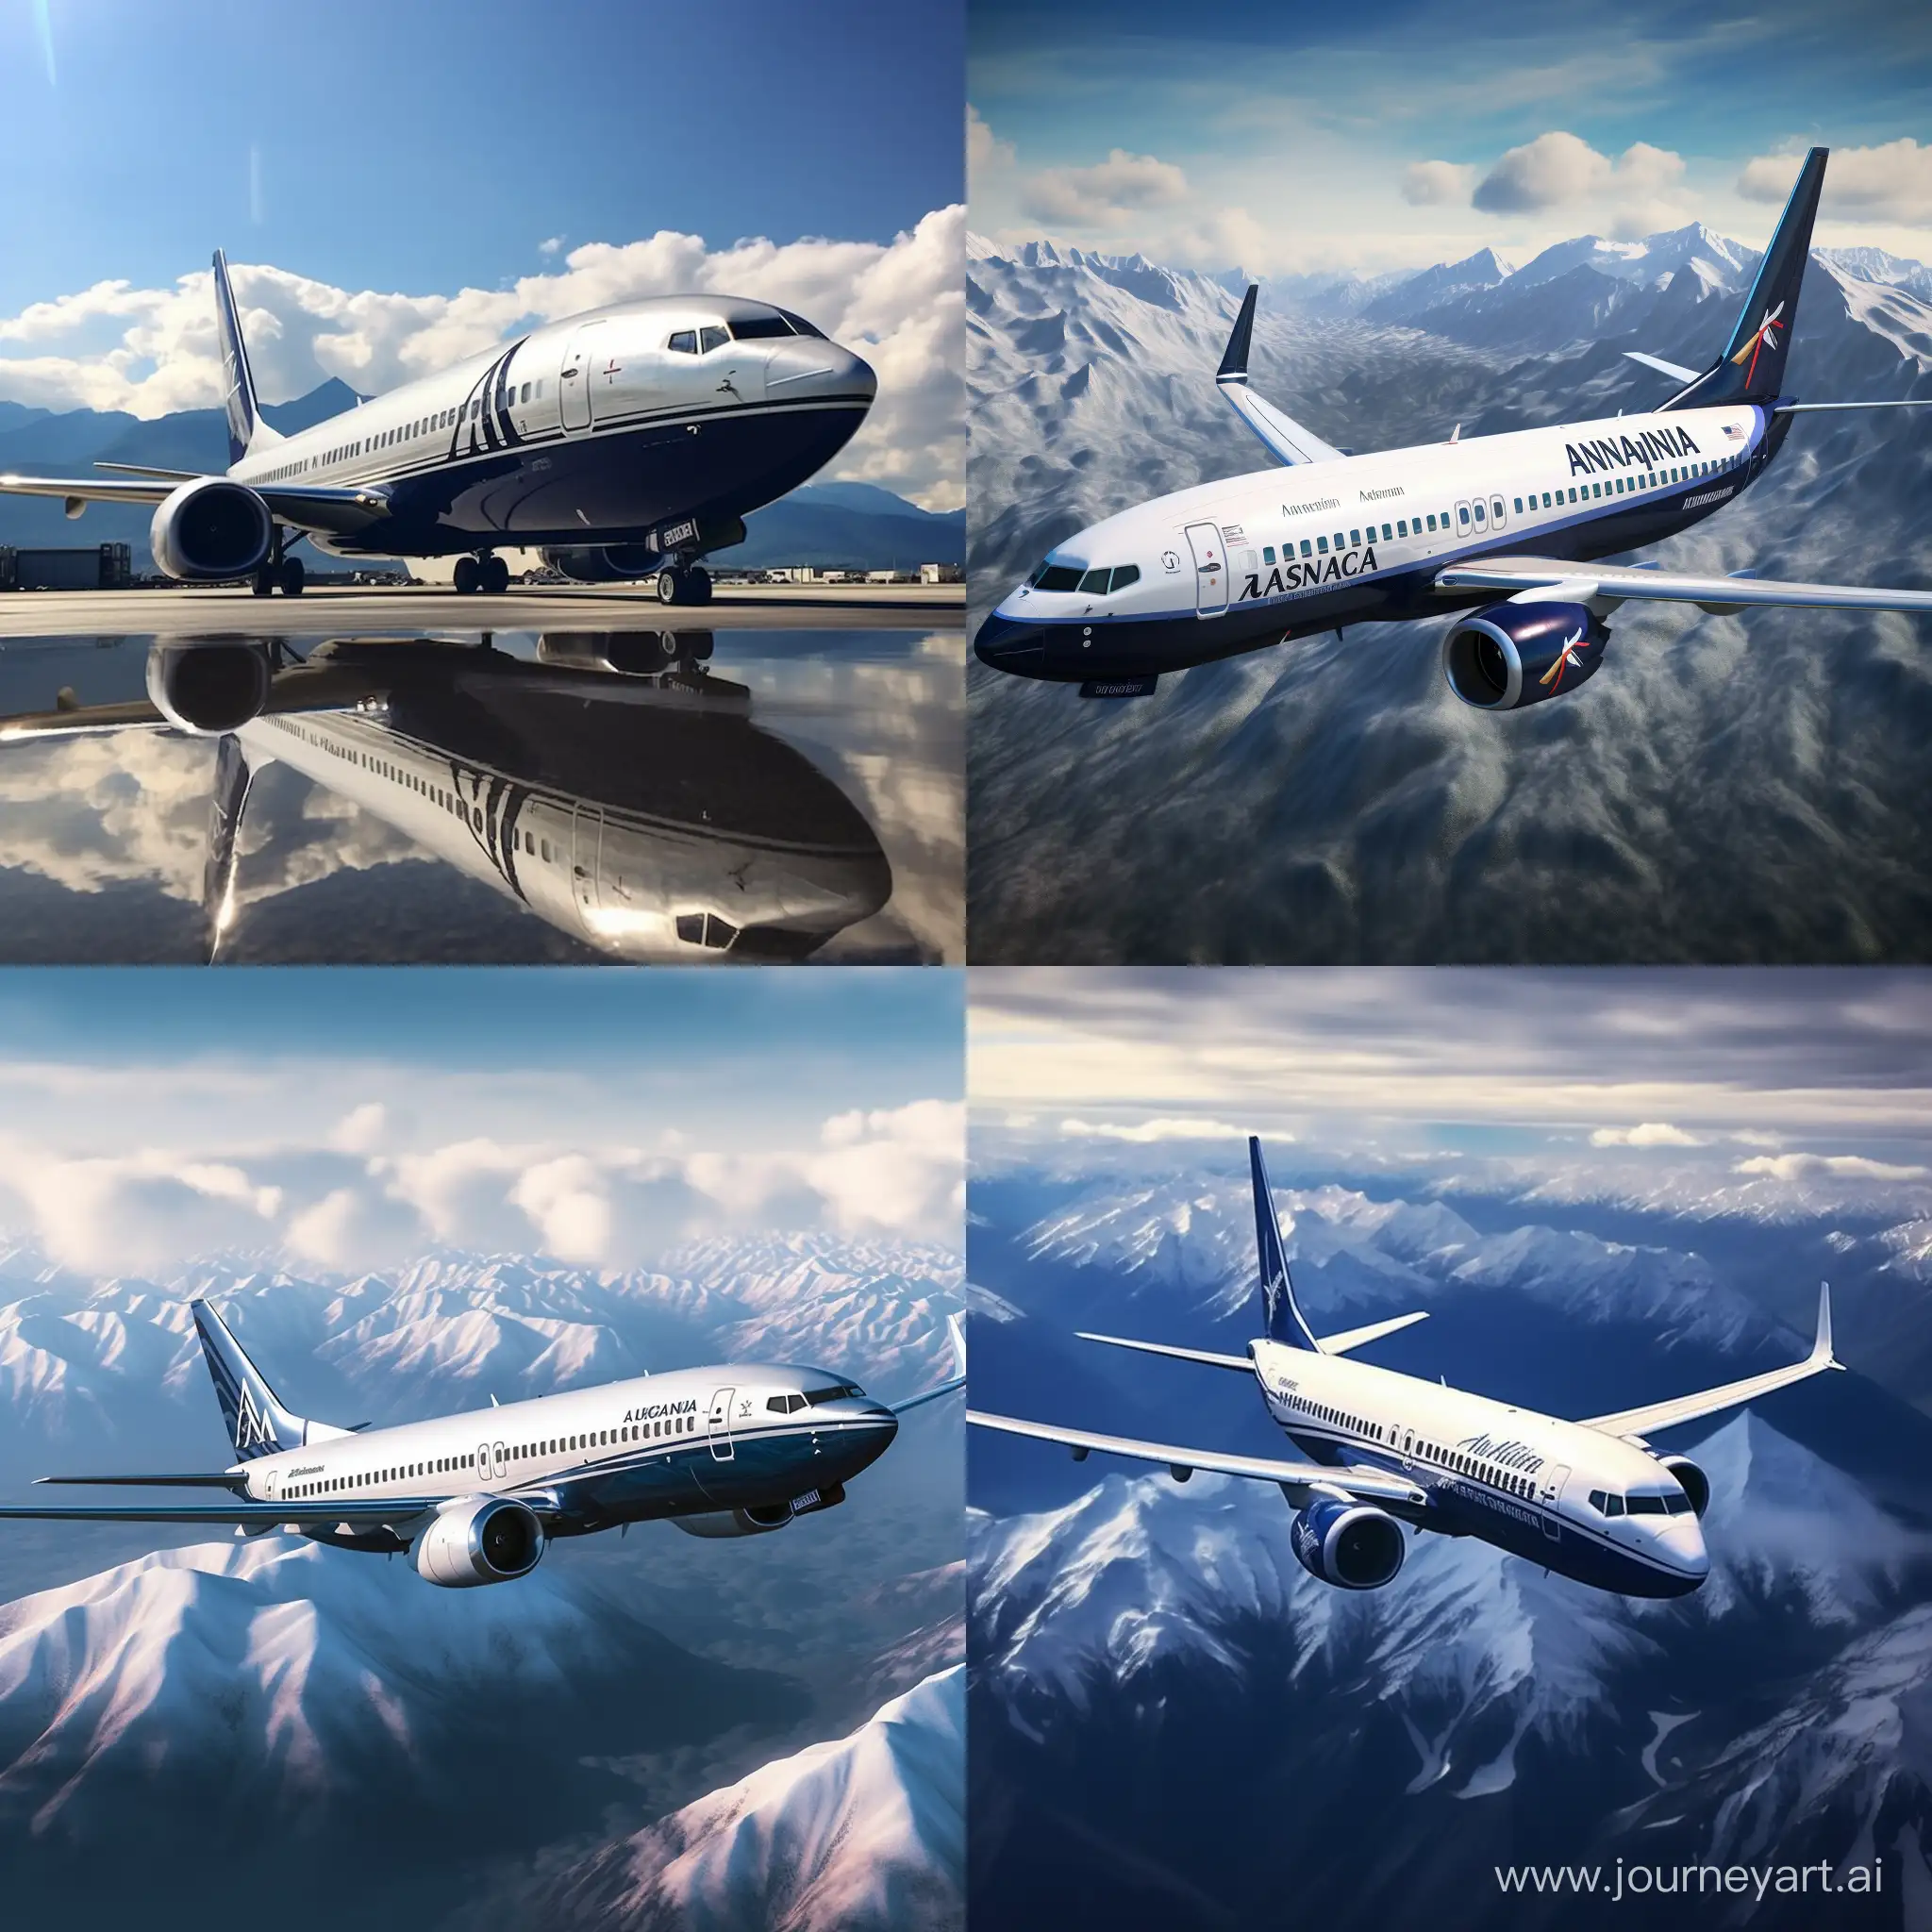 Alaskan-Boeing-737-Repaired-with-Duct-Tape-Photorealistic-Aviation-Art